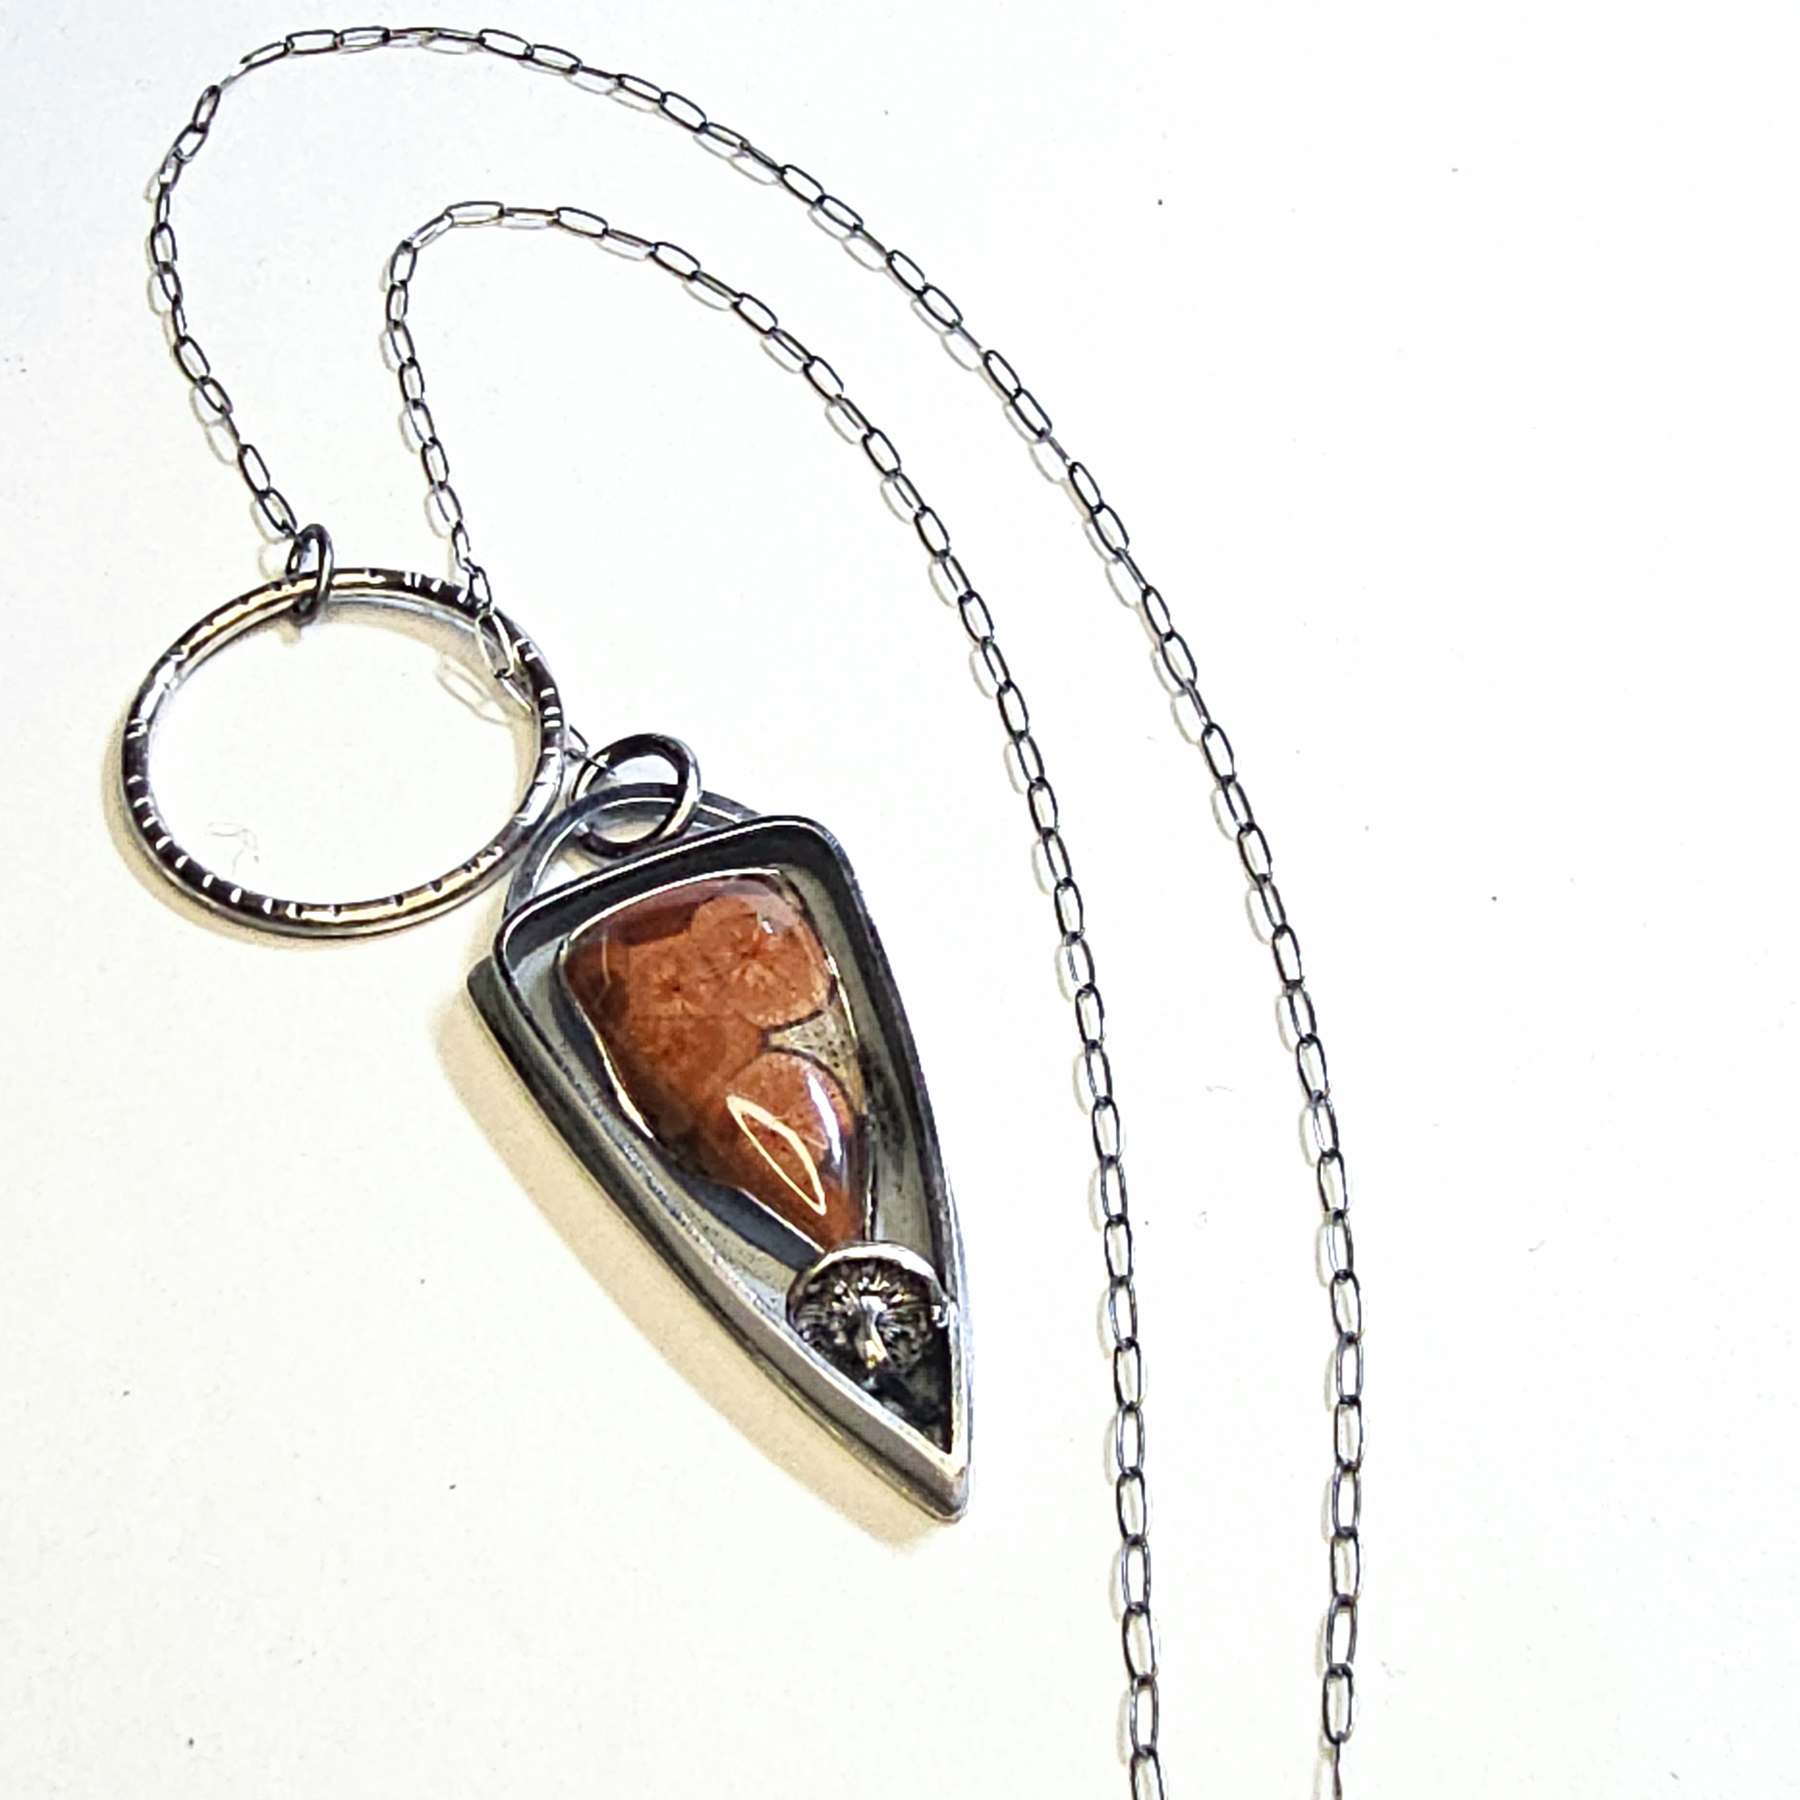 Sterling silver necklace set with jasper, image courtesy of Christen Booth